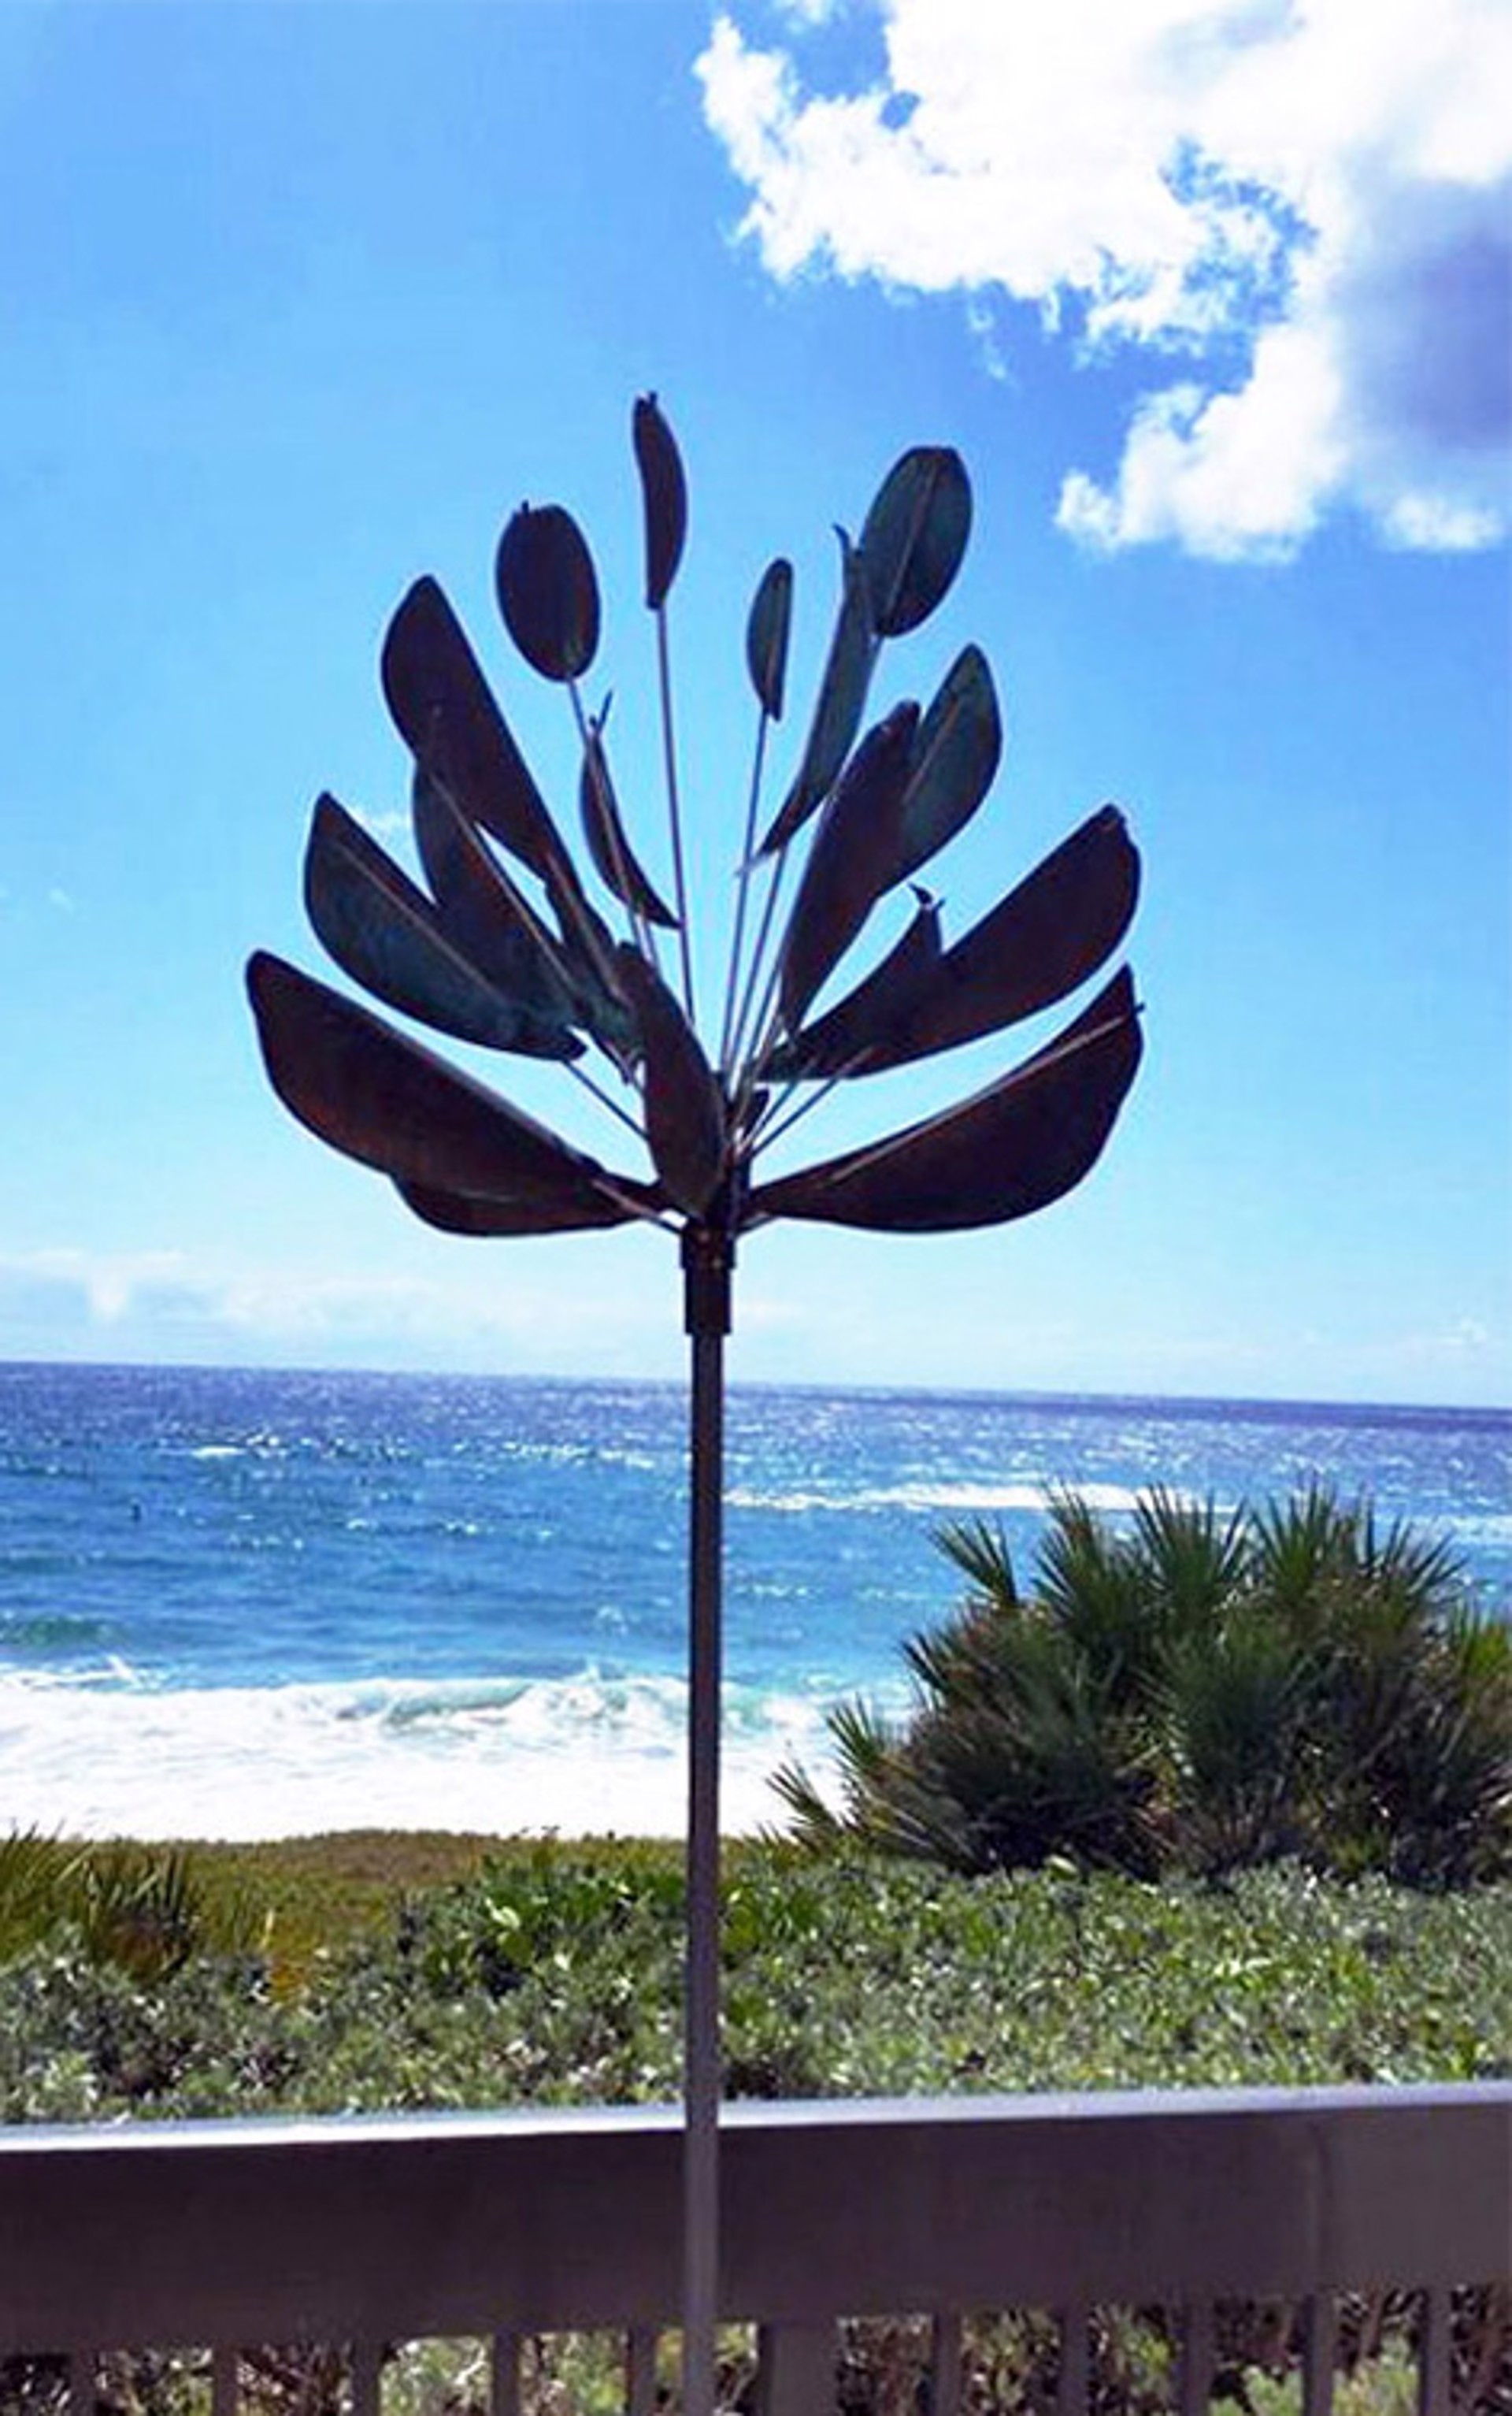 Agave by Lyman Whitaker